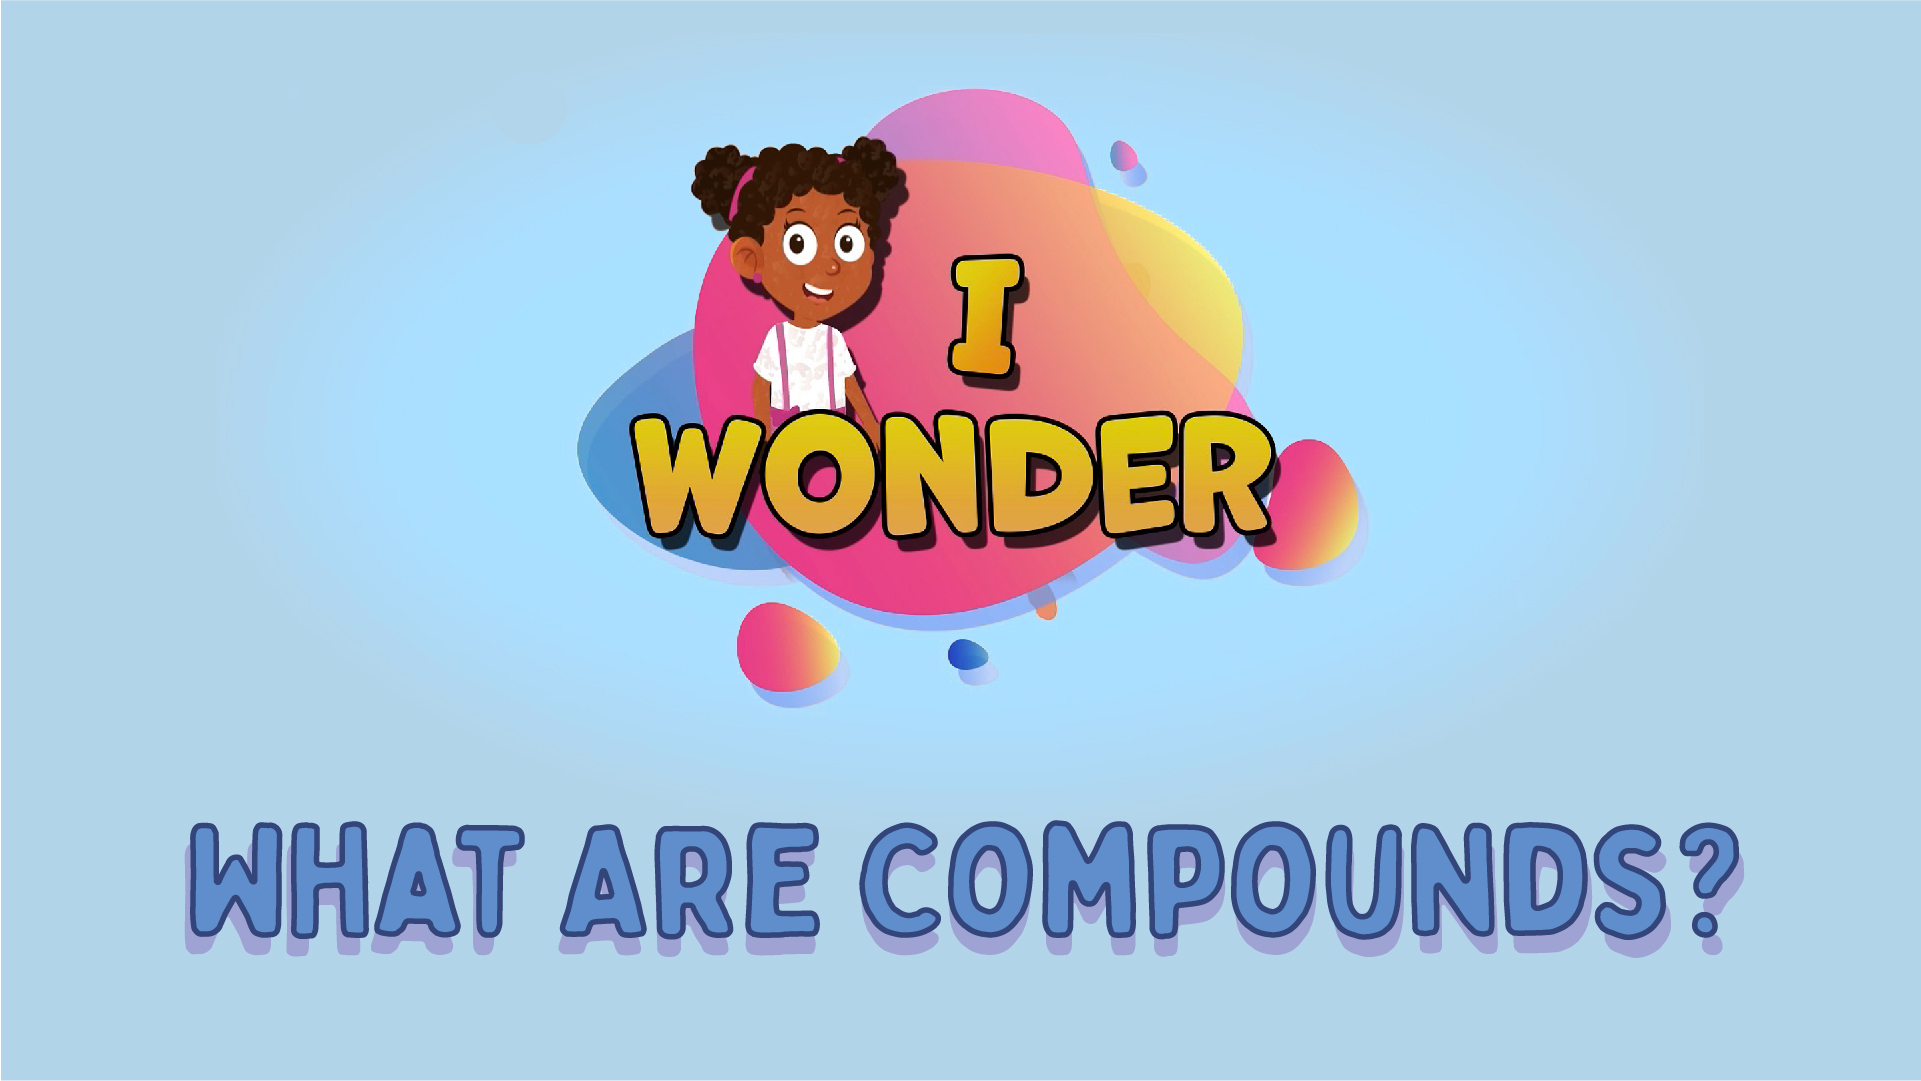 What Are Compounds?